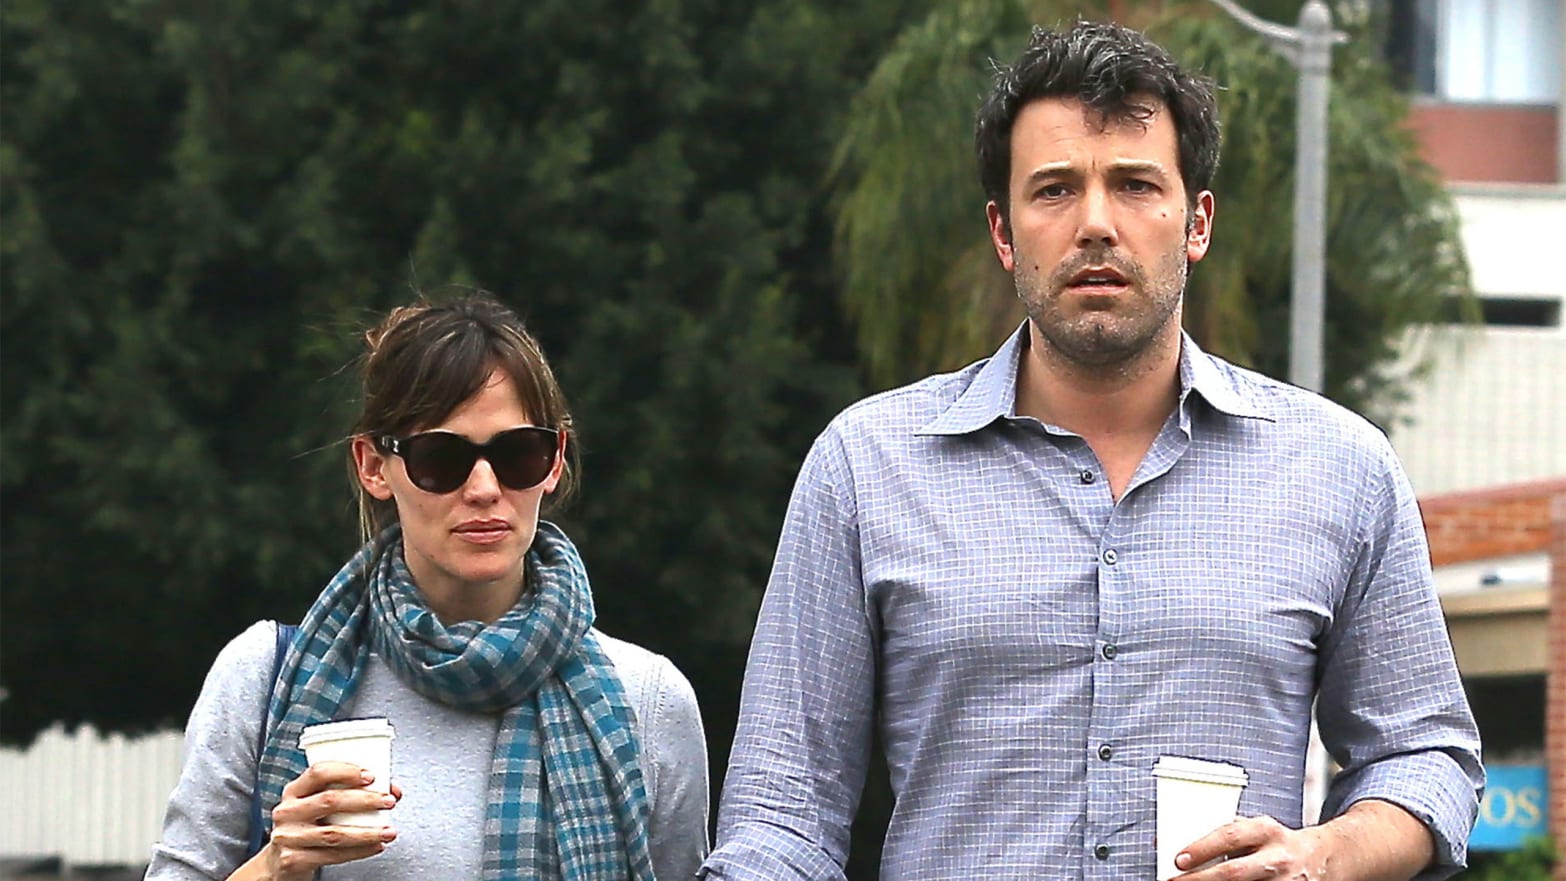 Jennifer Garner on Ben Affleck and the Nanny: 'He Can Cast Quite a Shadow'